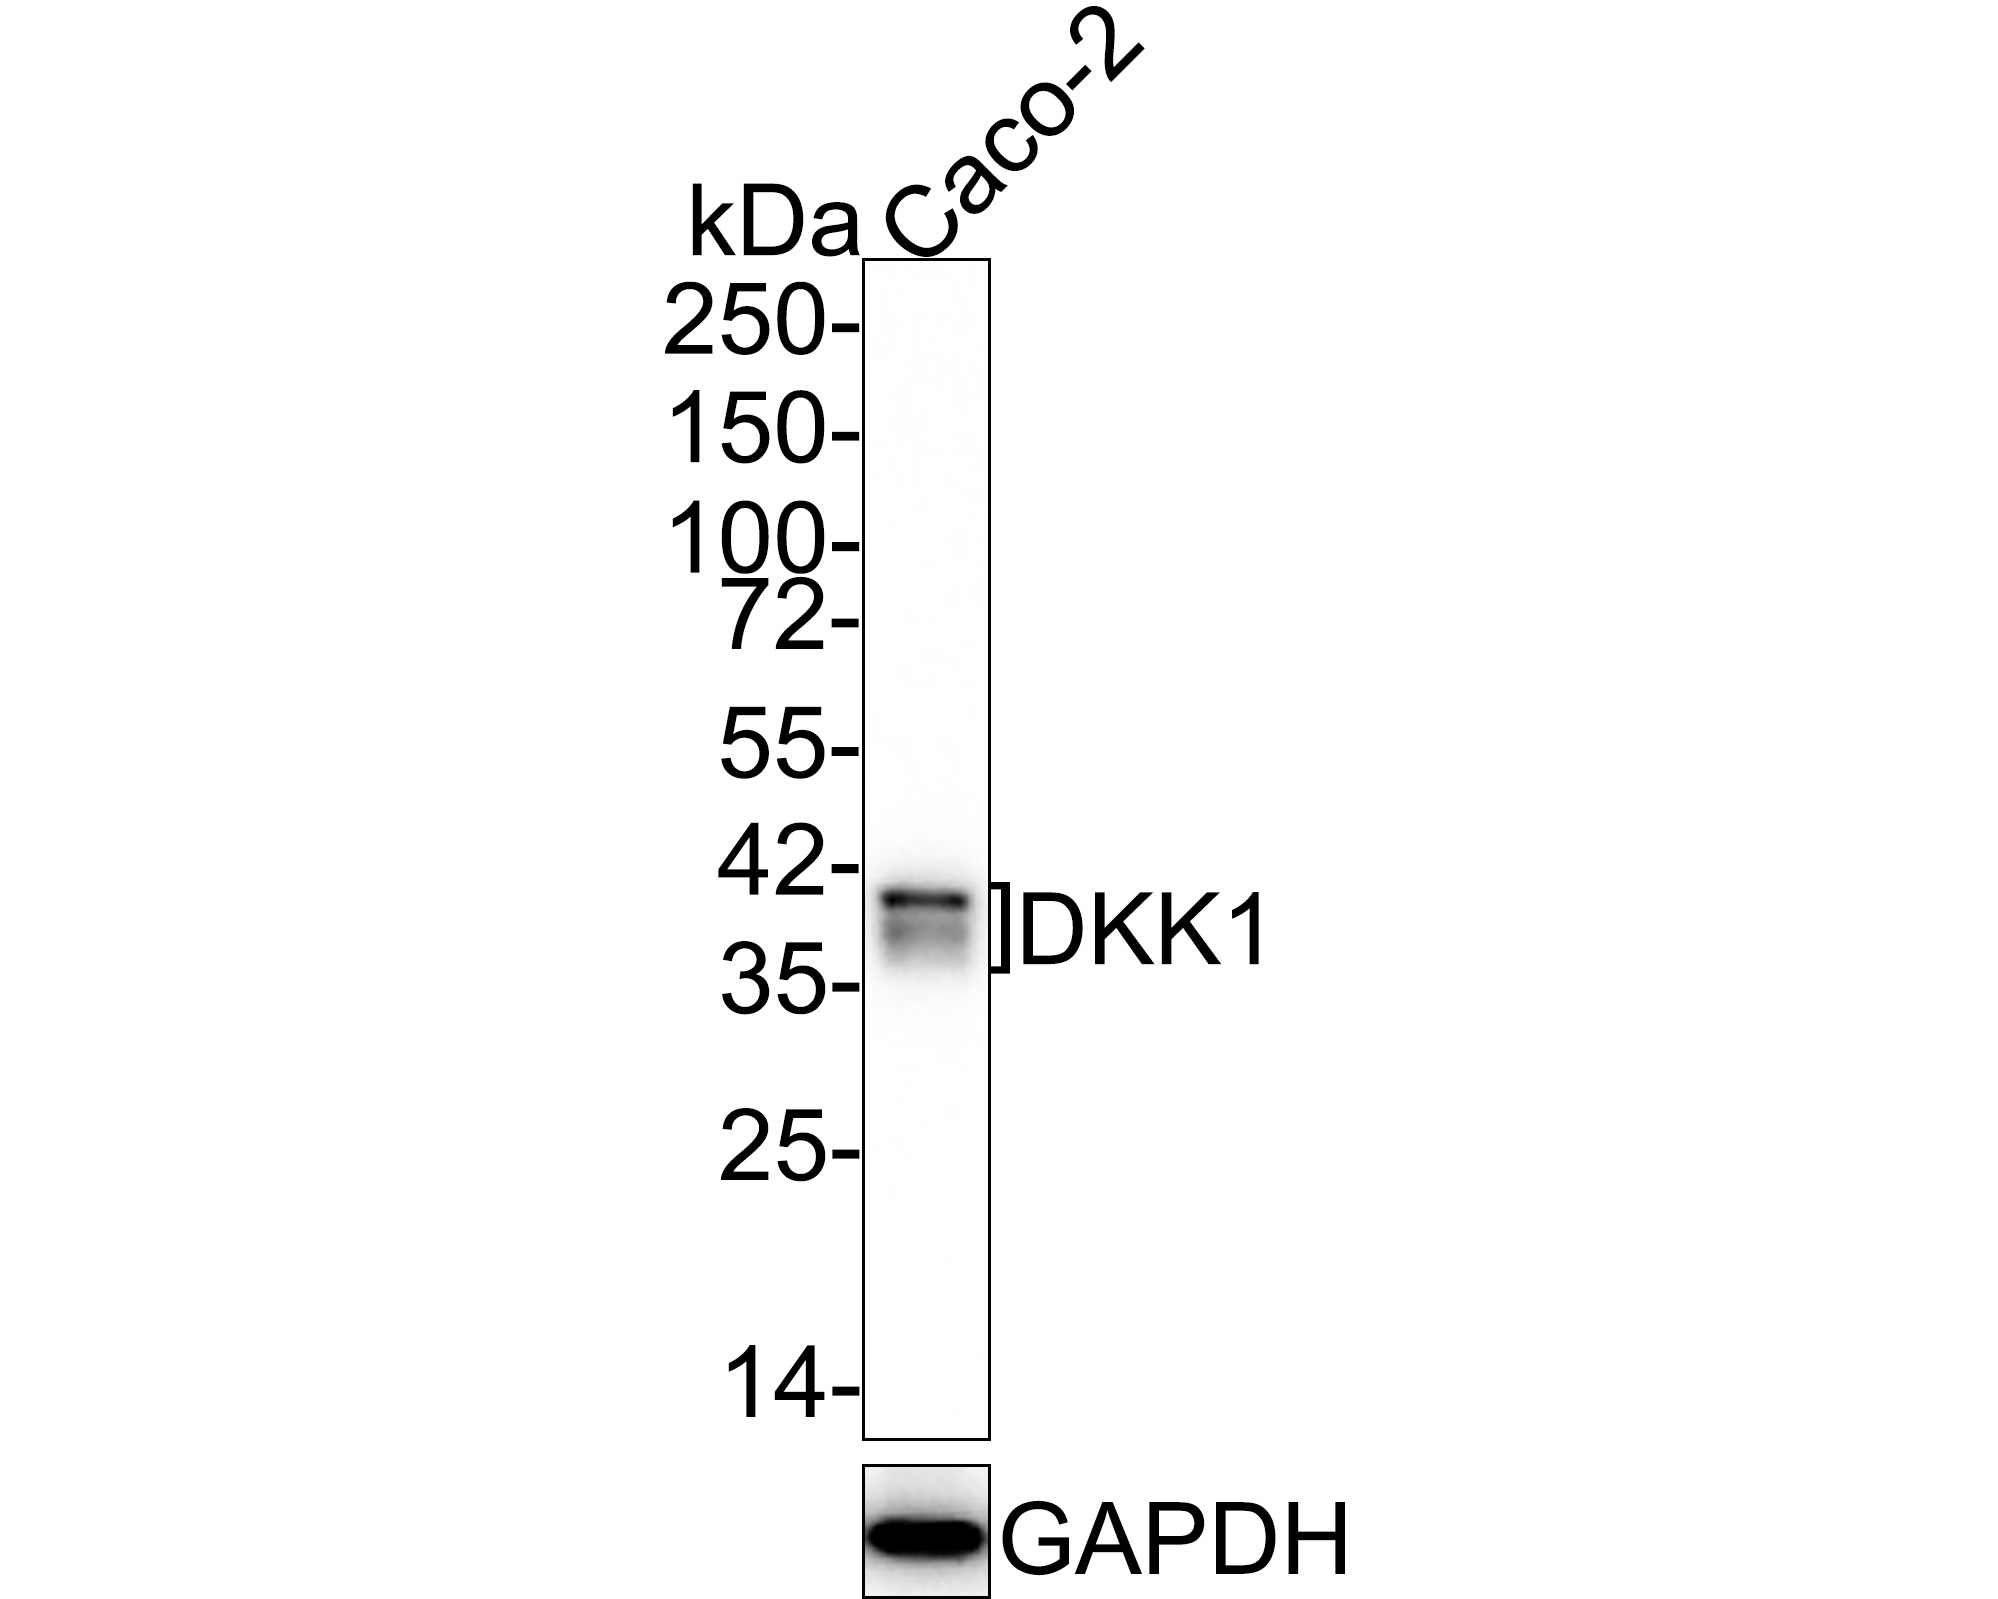 Western blot analysis of DKK1 on MCF-7 cell lysates. Proteins were transferred to a PVDF membrane and blocked with 5% BSA in PBS for 1 hour at room temperature. The primary antibody (ET1610-63, 1/500) was used in 5% BSA at room temperature for 2 hours. Goat Anti-Rabbit IgG - HRP Secondary Antibody (HA1001) at 1:5,000 dilution was used for 1 hour at room temperature.